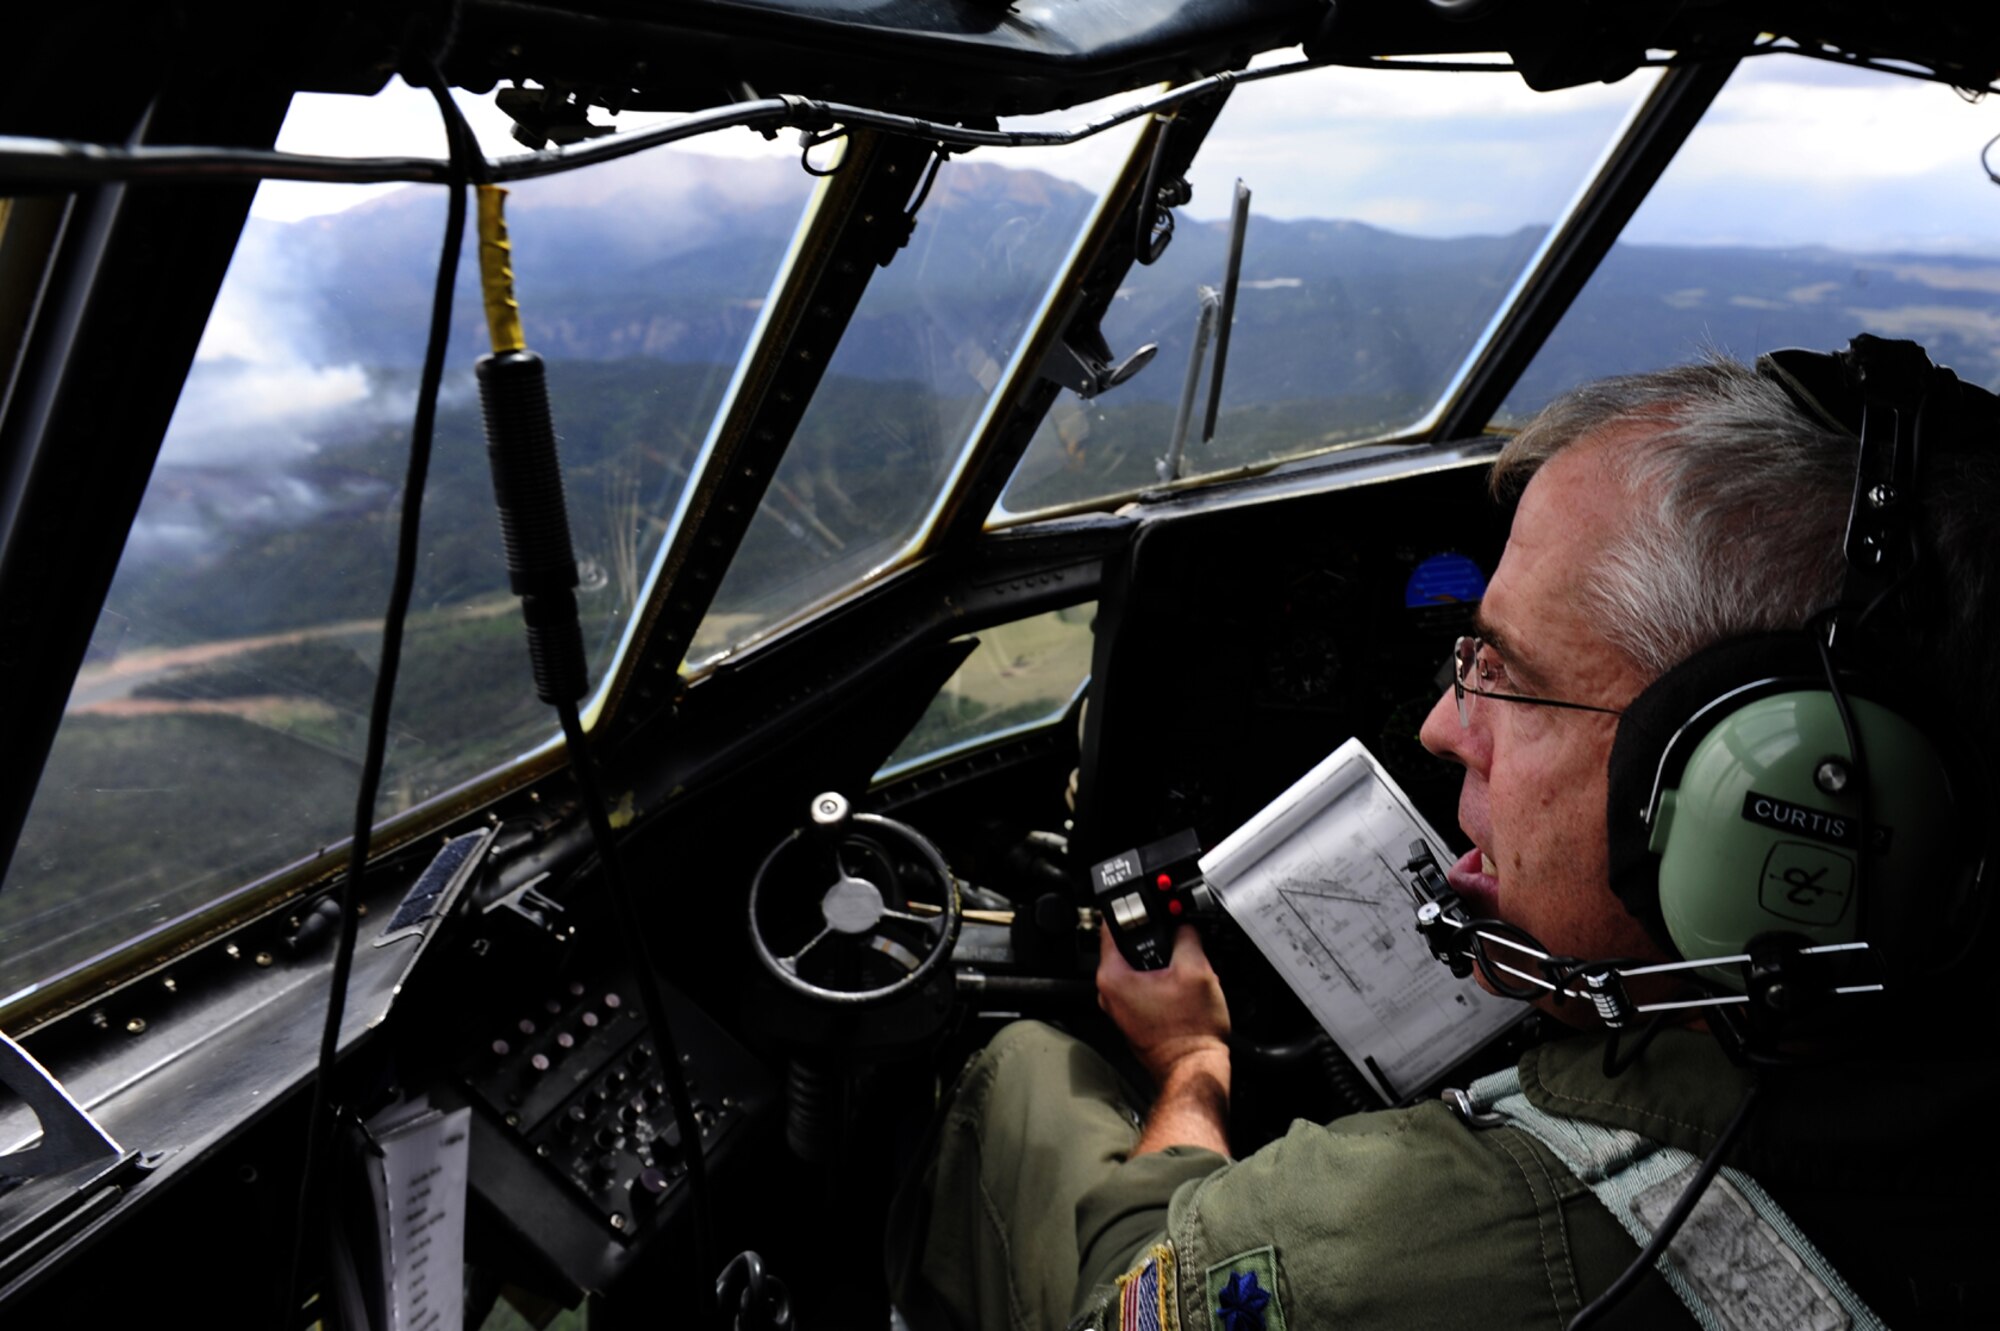 Lt. Col. Barry Curtis, a MAFFS-trained pilot with the 302 Airlift Wing, Peterson Air Force Base, Colo. flies a C-130 Hercules aircraft in support of the U.S. Forest Services fire suppression efforts in the Rocky Mountain area June 27, 2012.   (U.S. Air Force photo/ Staff Sgt. Stephany D. Richards)